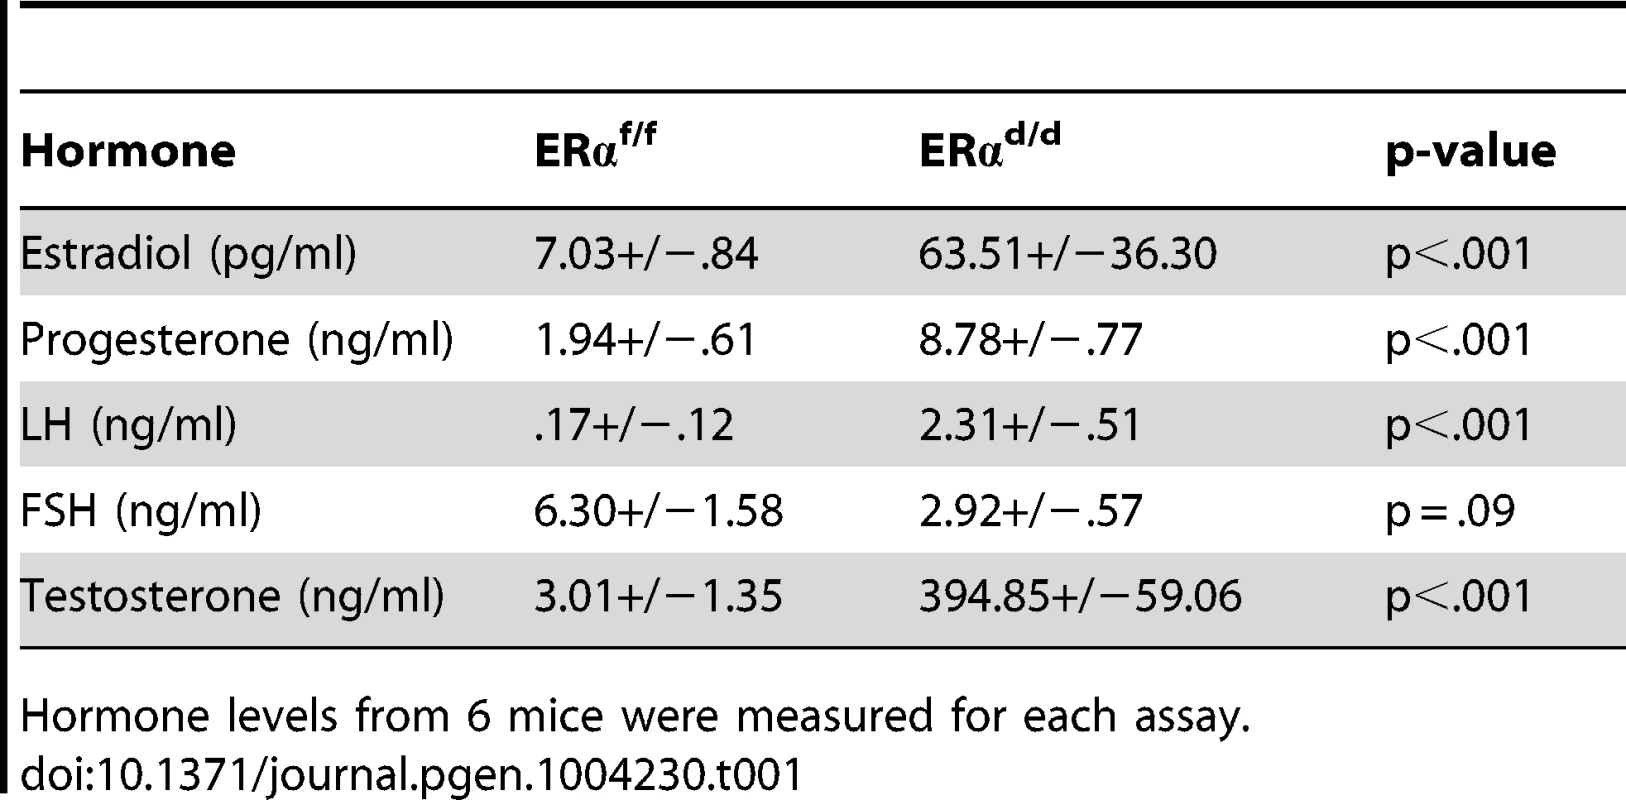 Serum hormone measurements of ERα<sup>f/f</sup> and ERα<sup>d/d</sup> mice at six months of age.